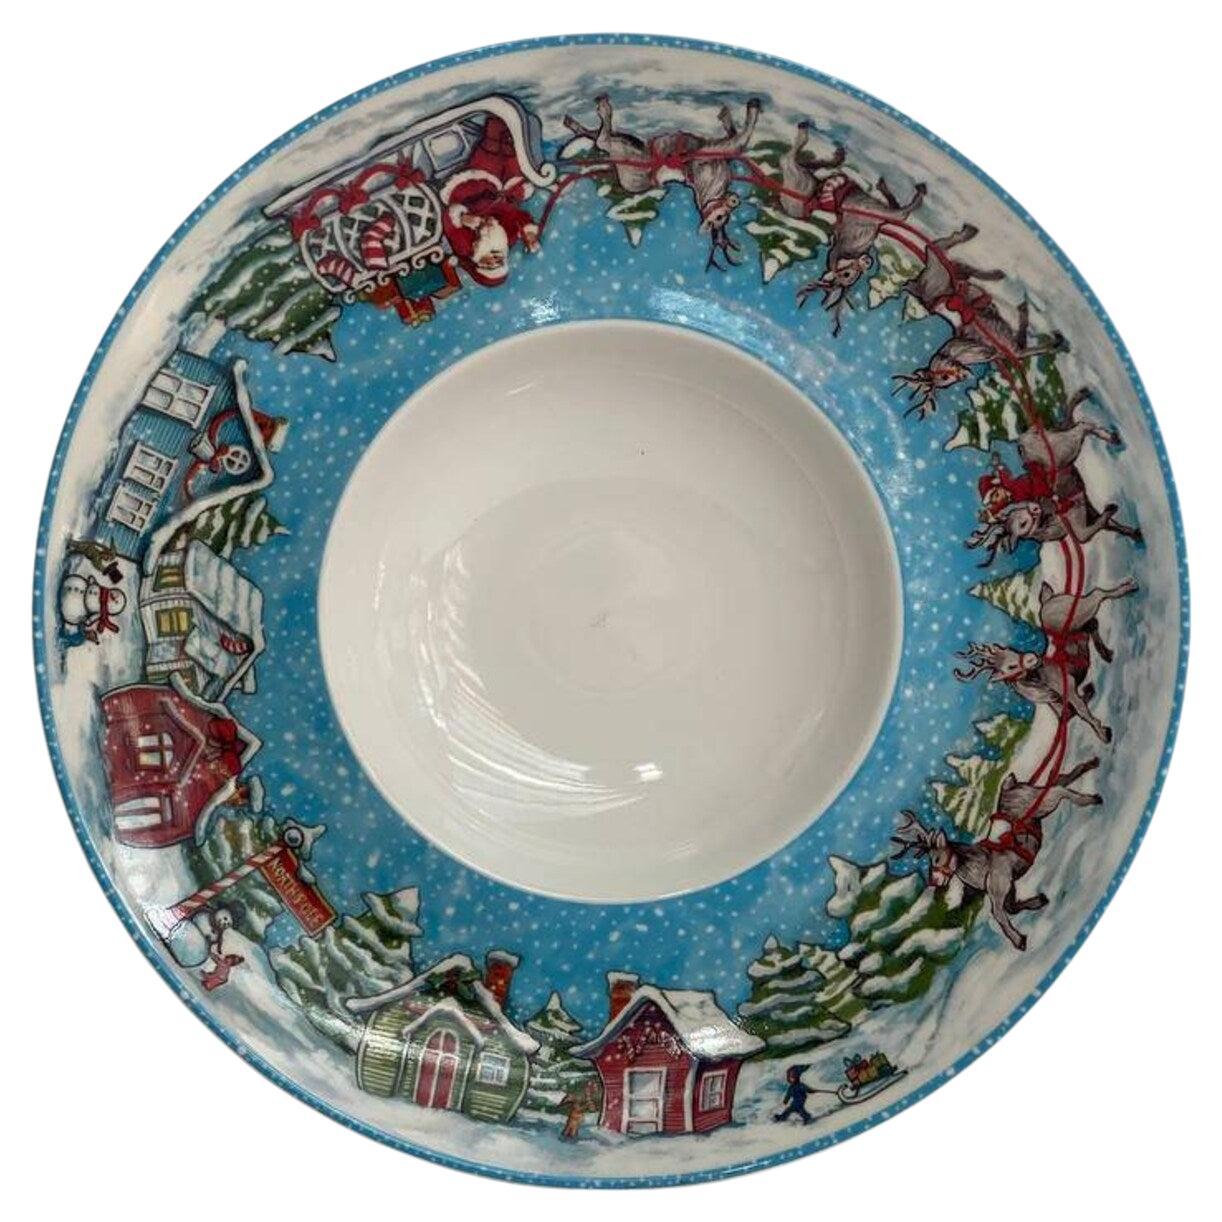 Beautiful Christmas Plate From Villeroy & Boch Porcelail Plate For Sale